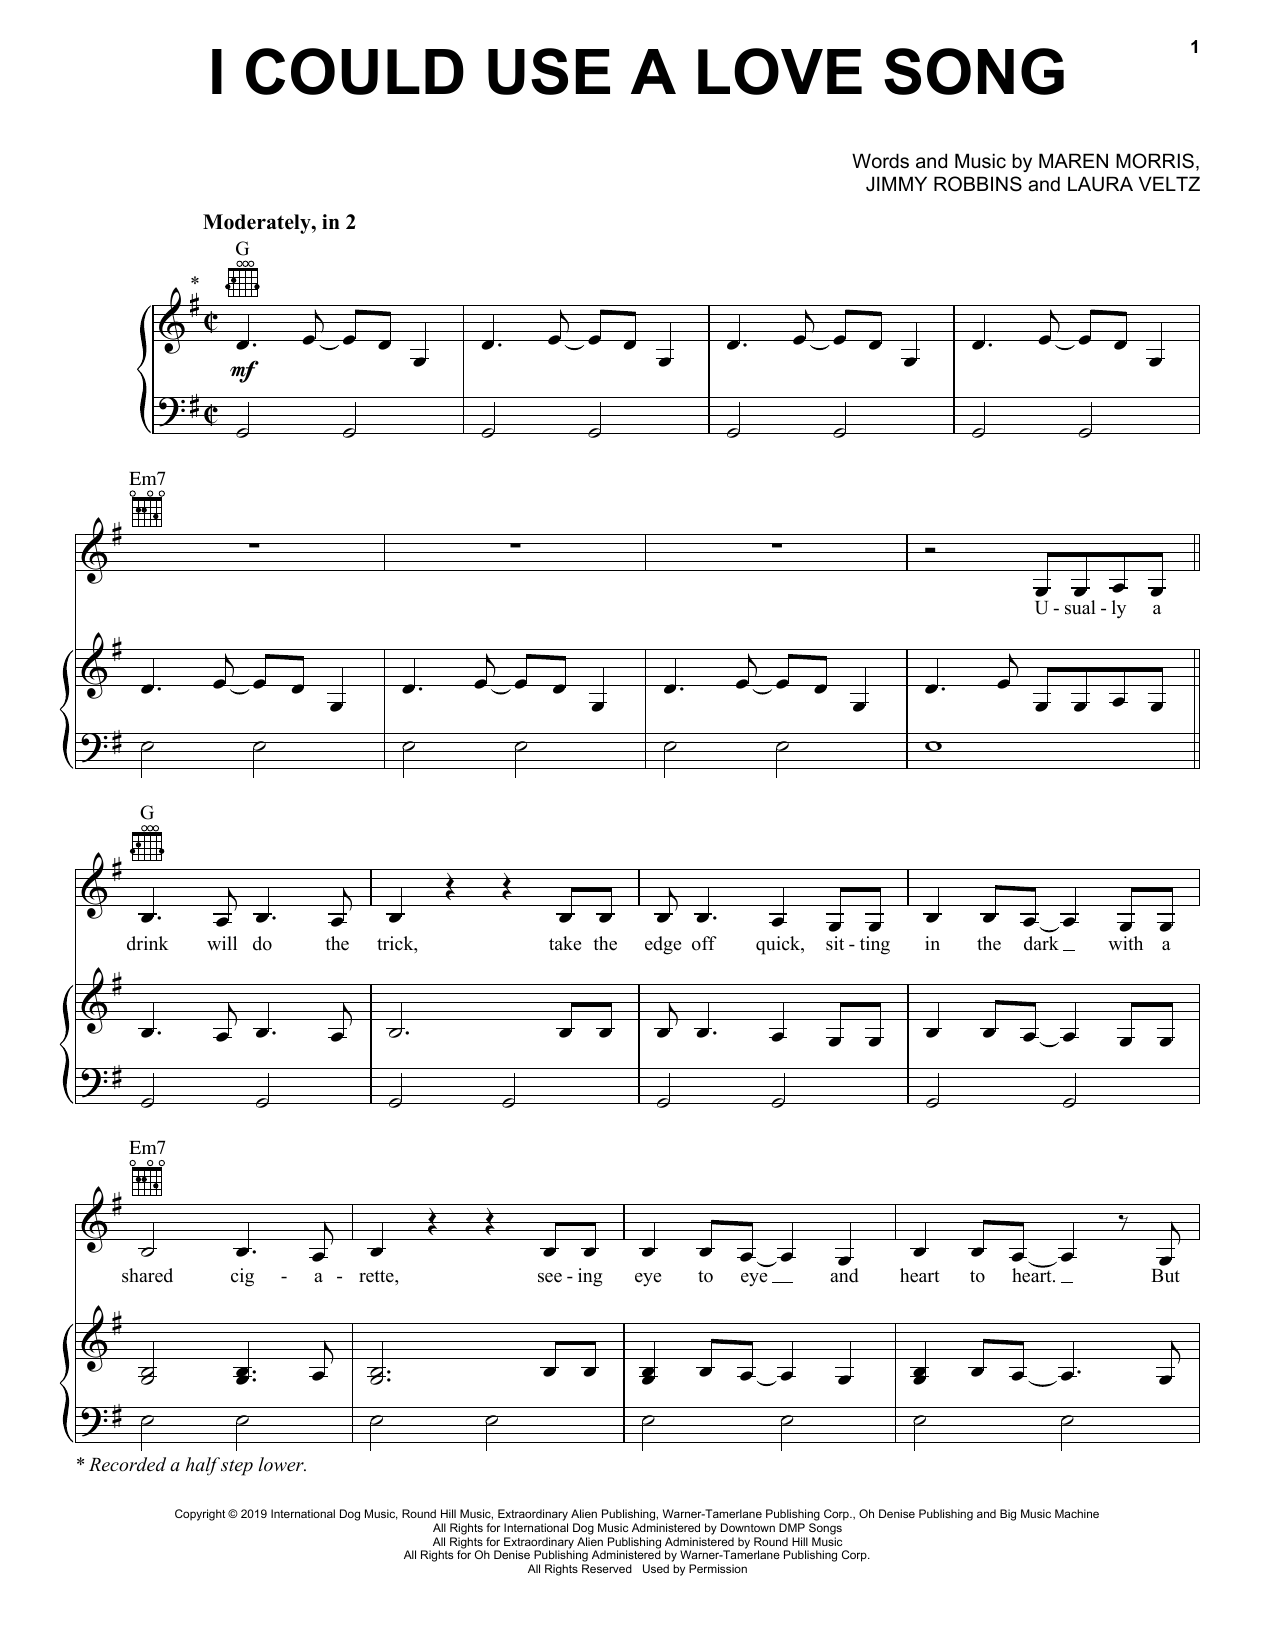 Download Maren Morris I Could Use A Love Song Sheet Music